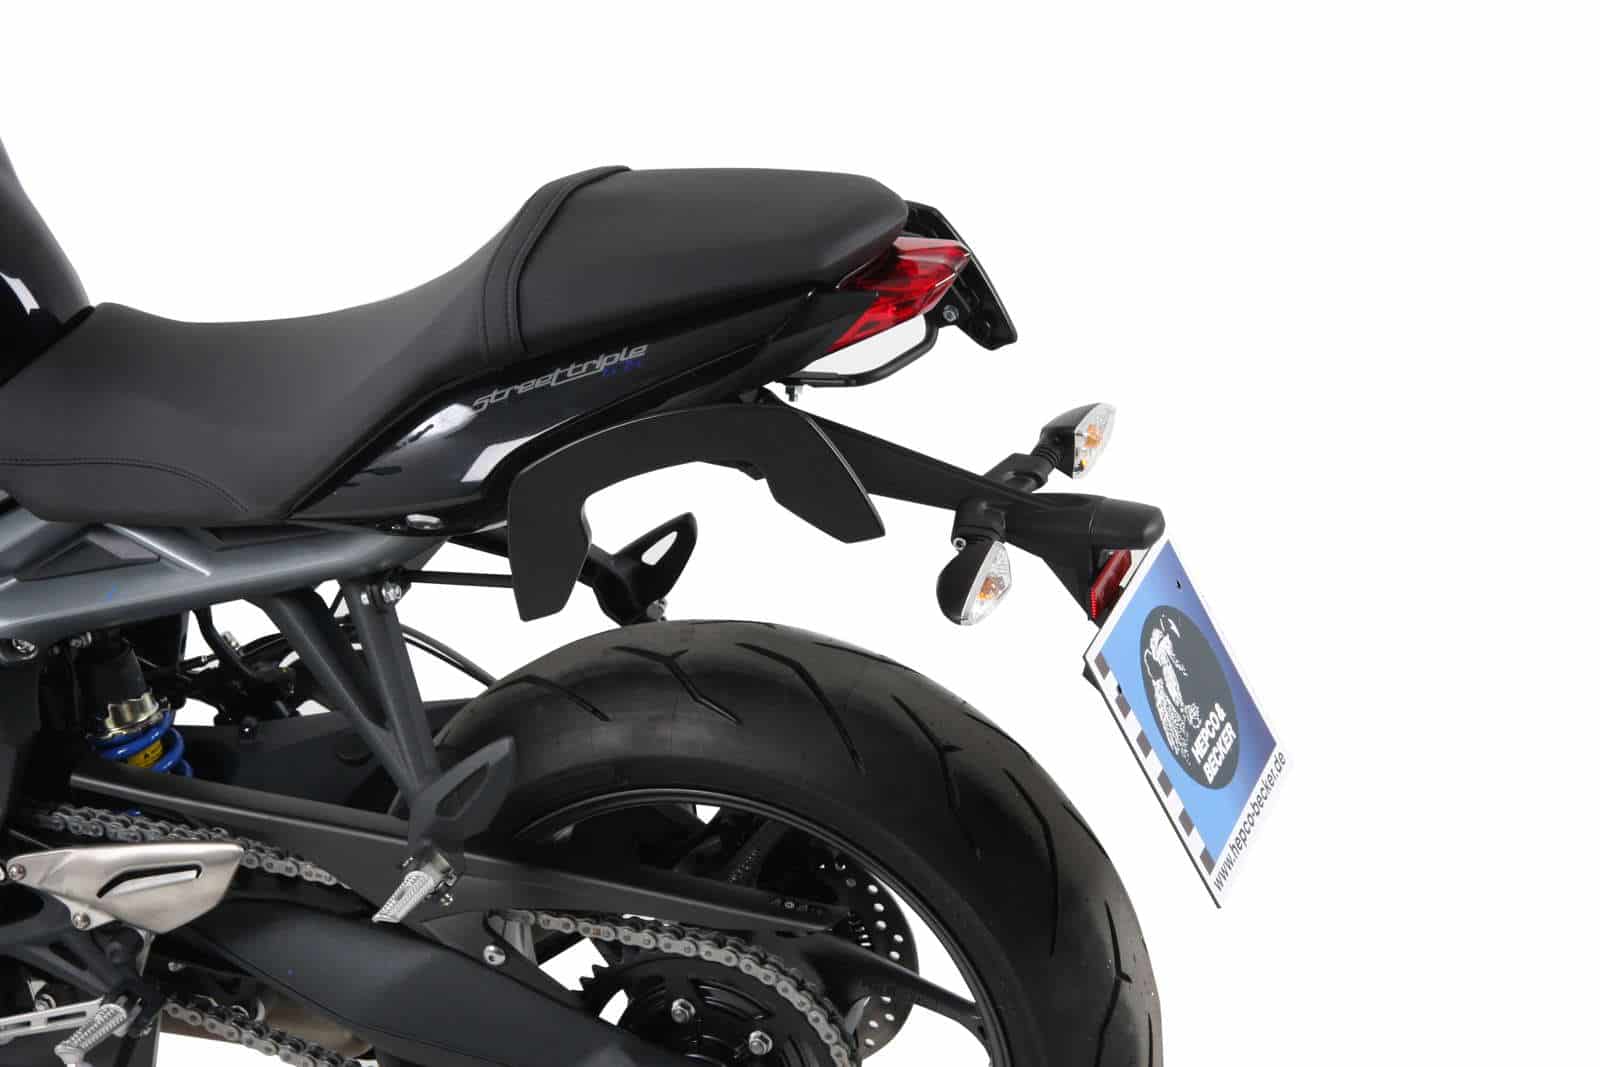 C-Bow sidecarrier for Triumph Street Triple 675/R (2013-2016)